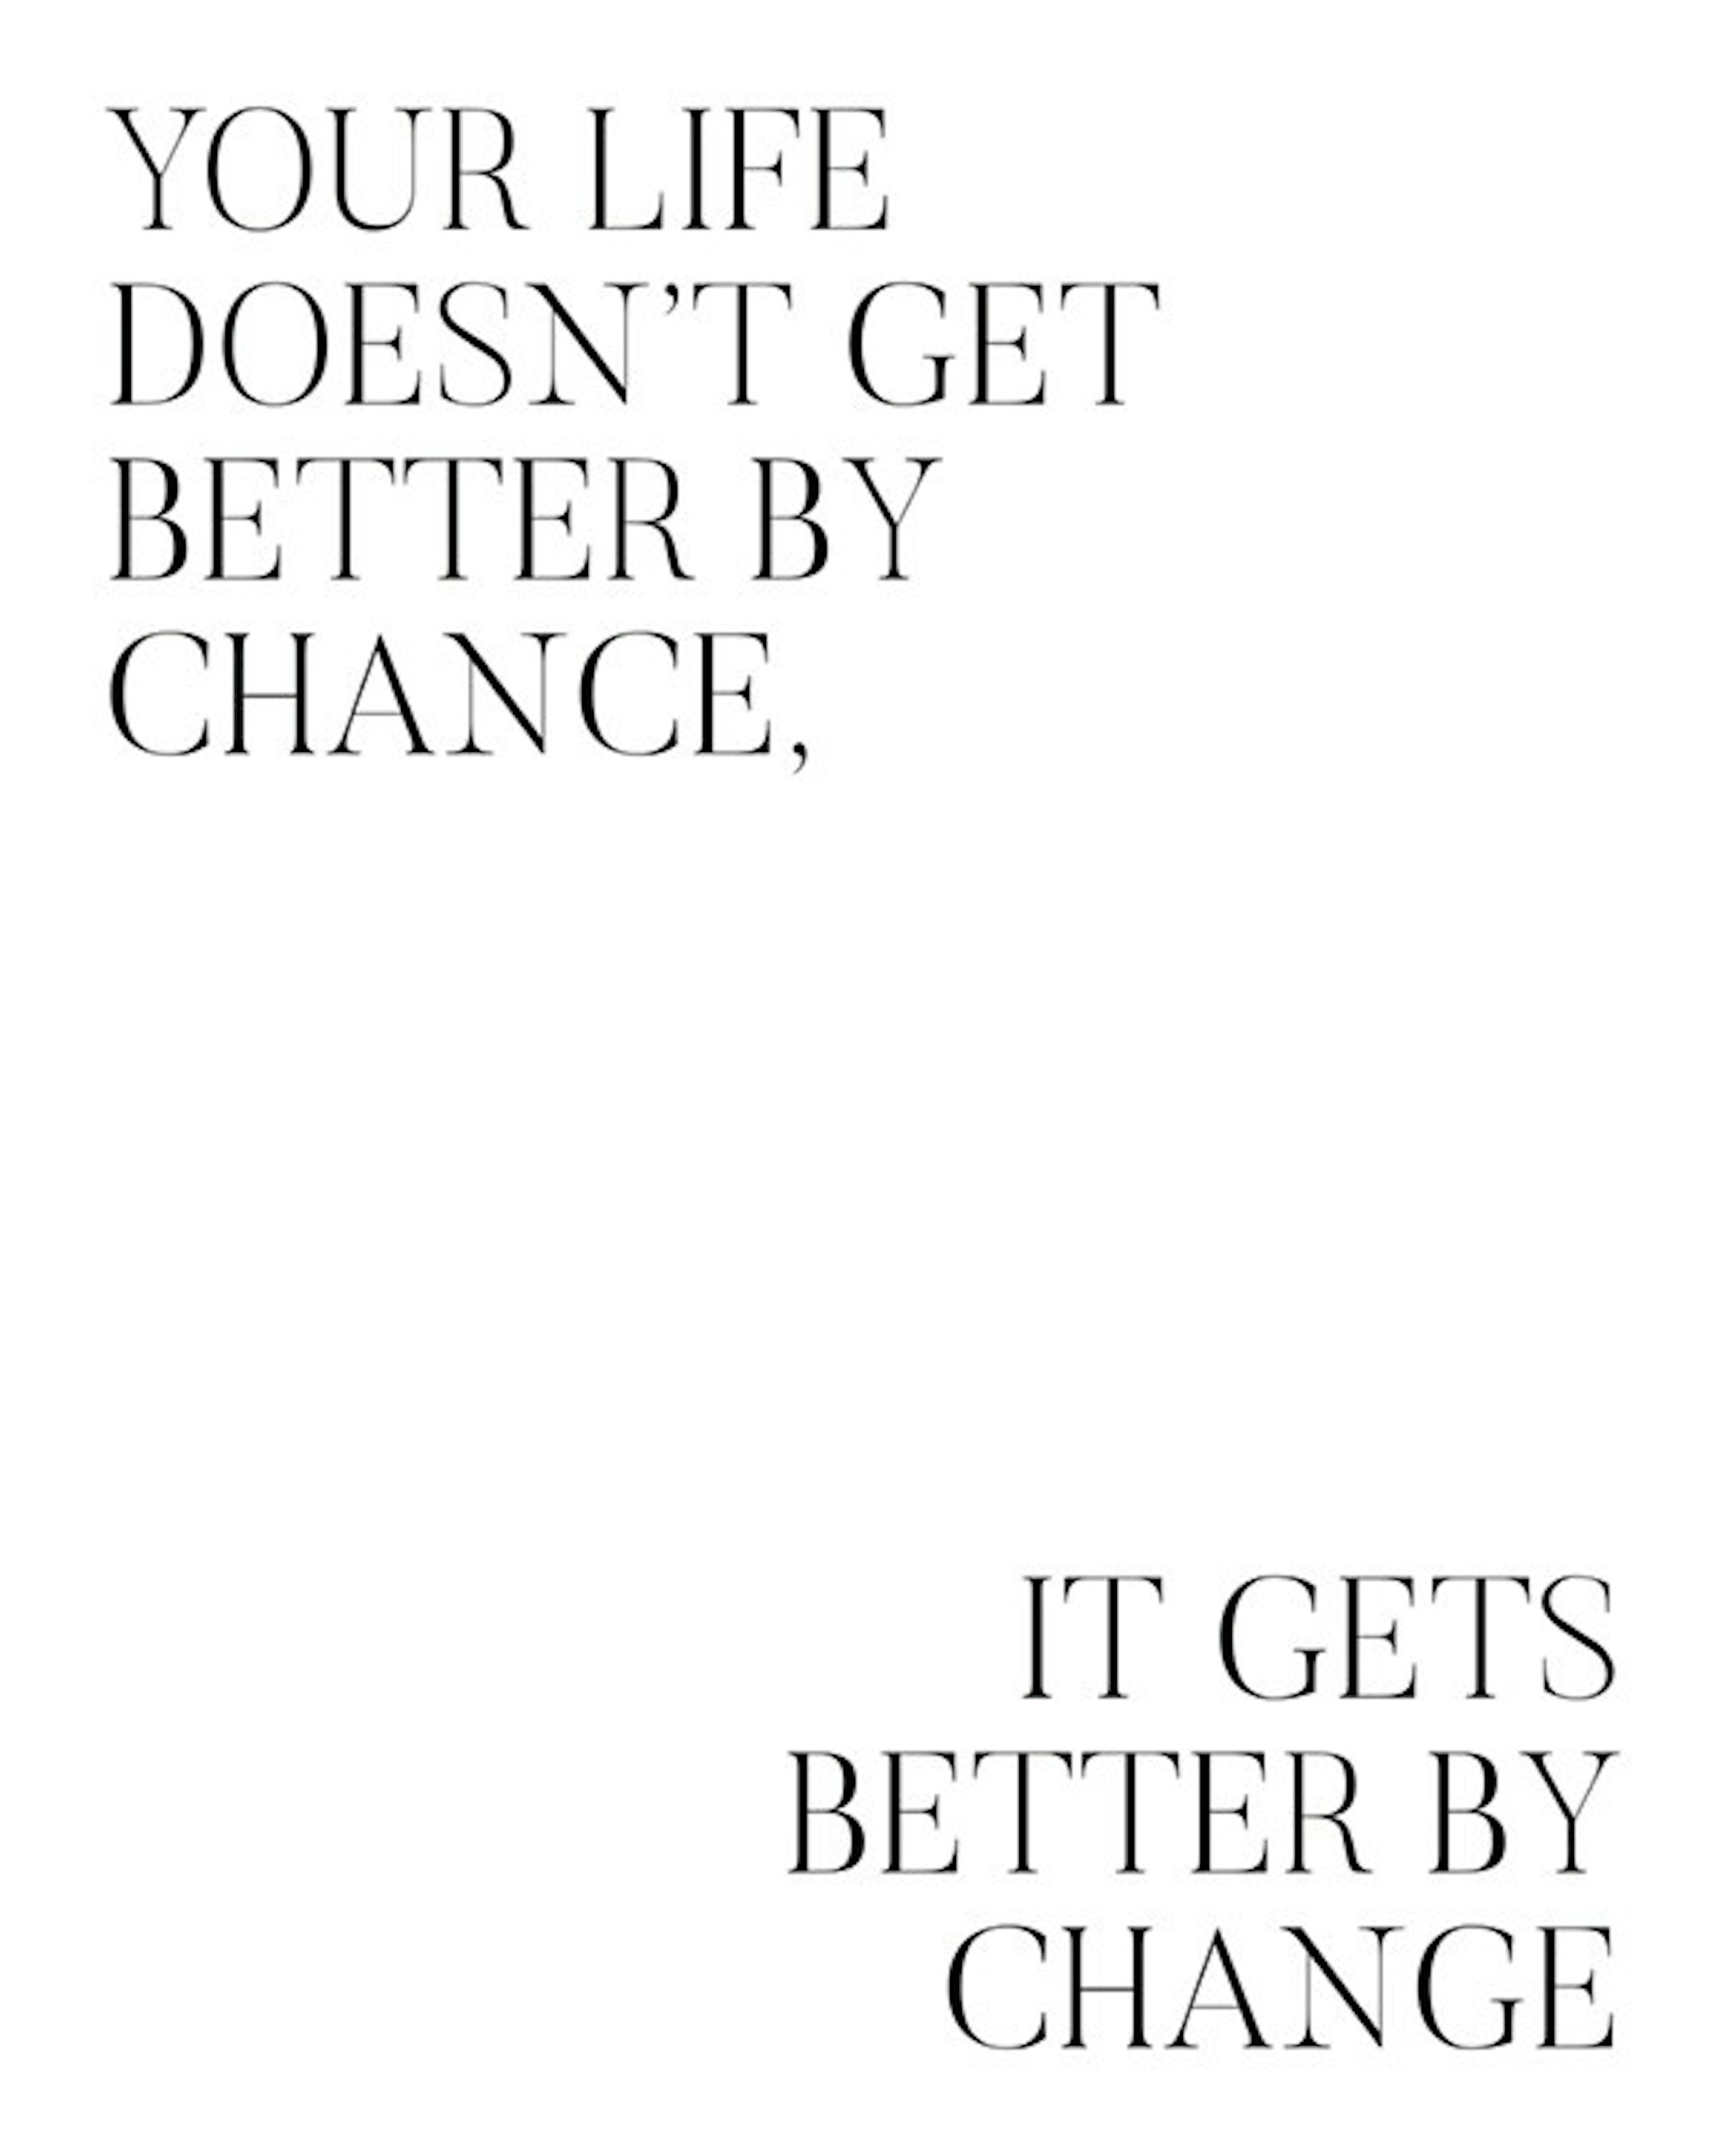 Better by Change Print 0